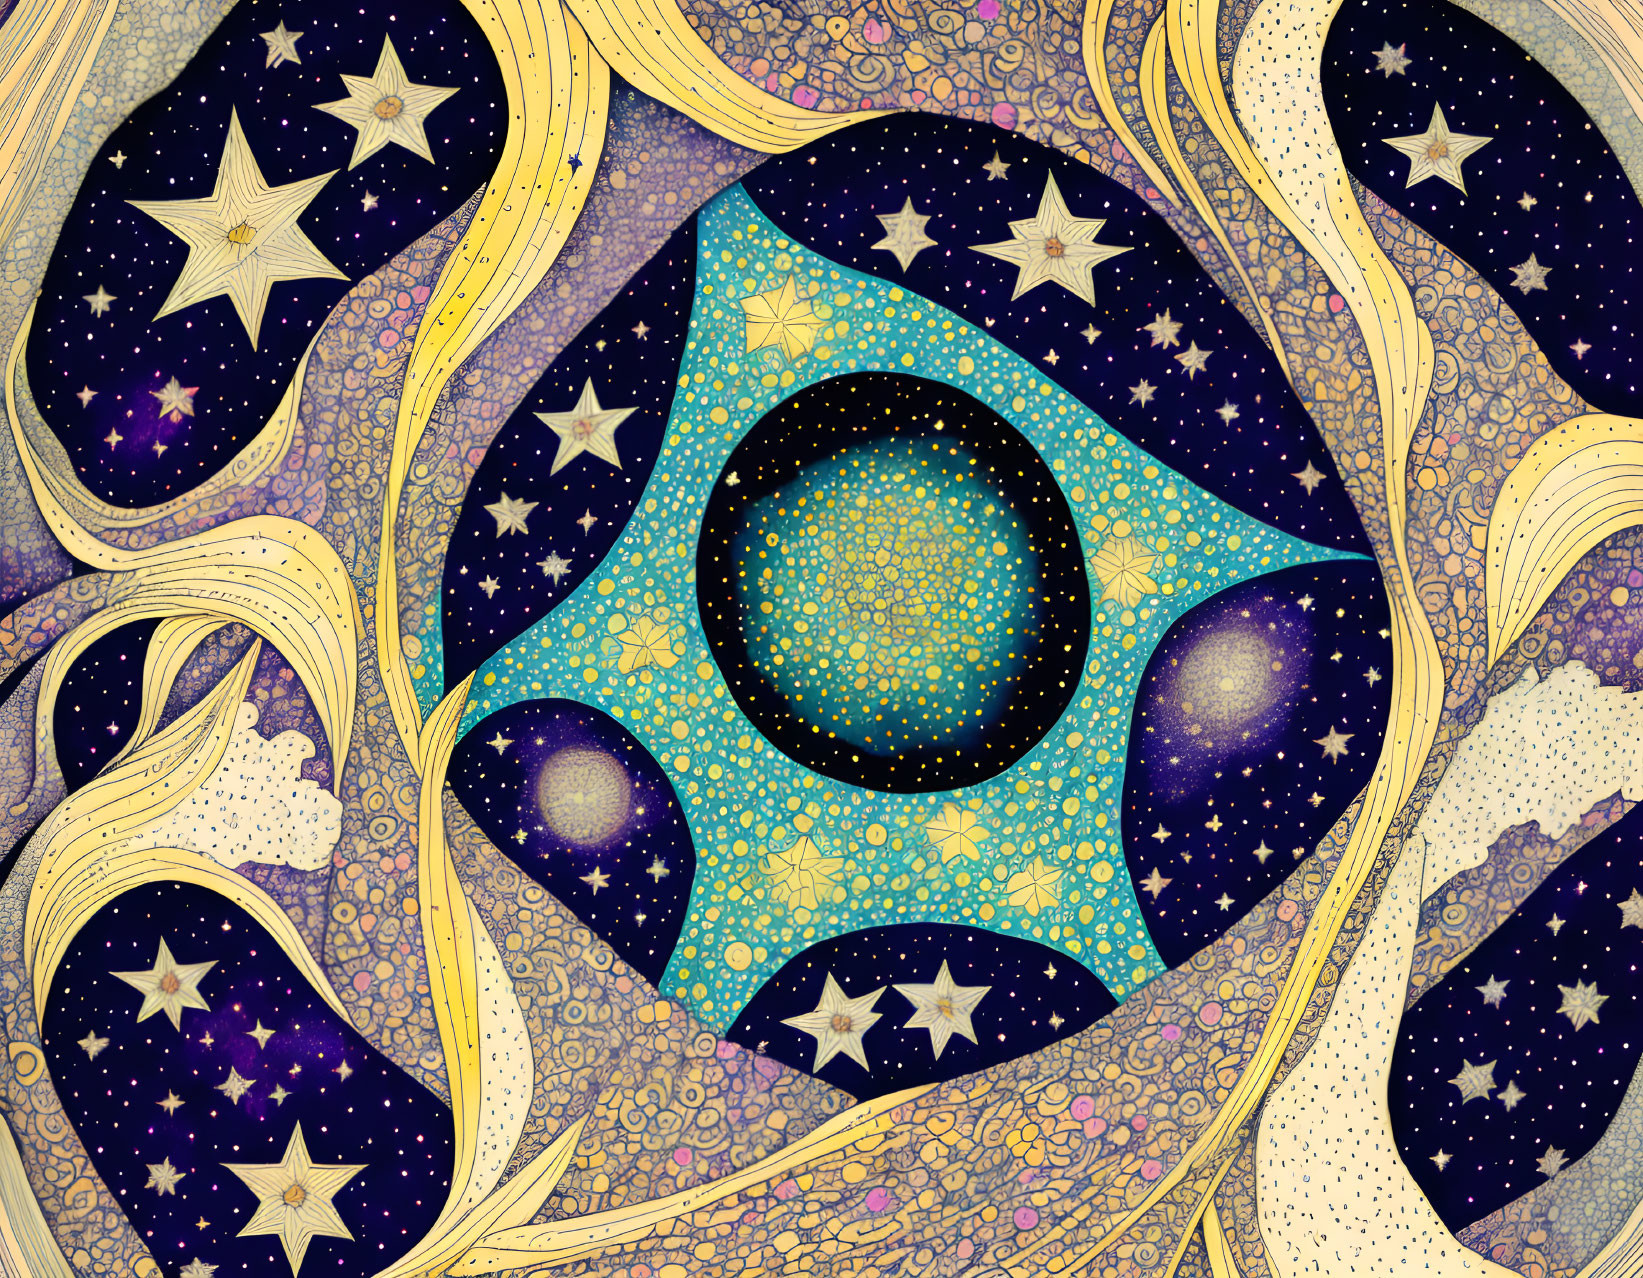 Cosmic abstract illustration with stars, galaxies, golden ribbons, and textured background